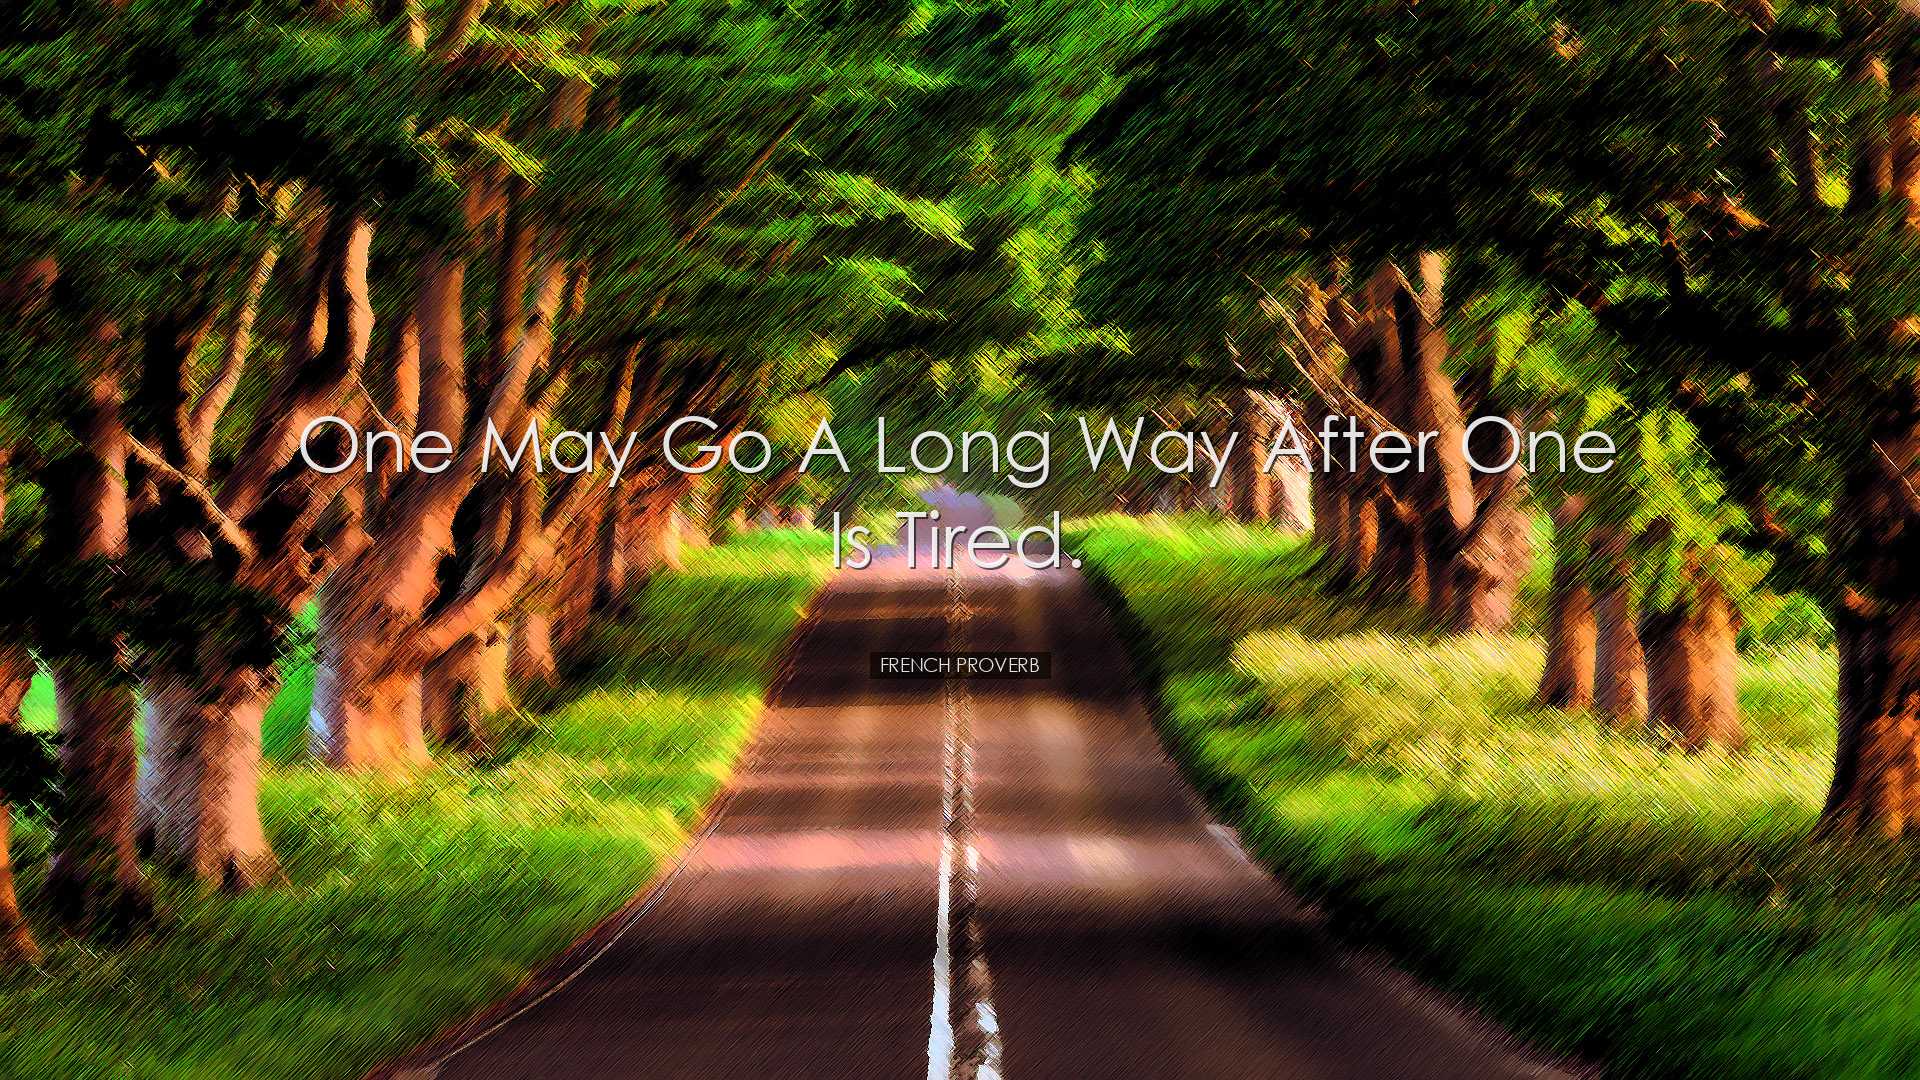 One may go a long way after one is tired. - French proverb